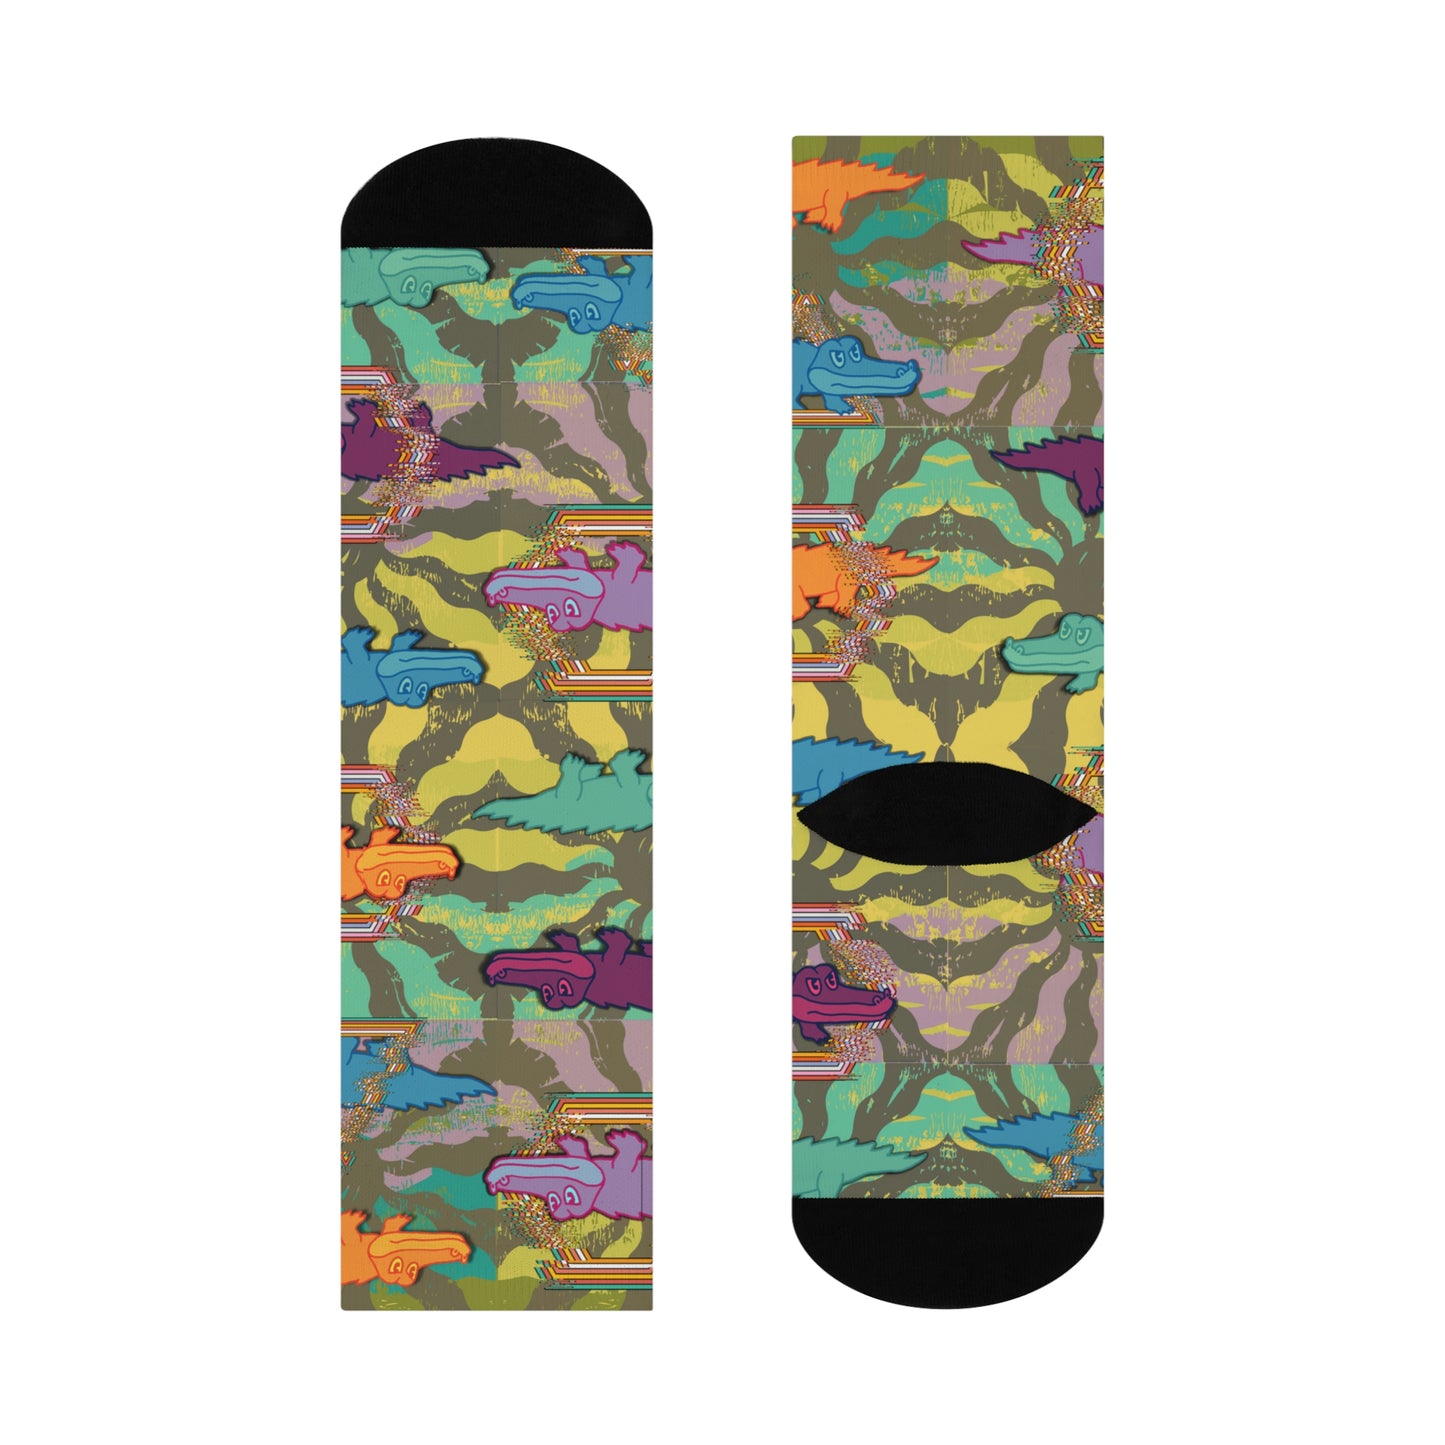 King Gizzard & the Lizard Wizard Psychedelic Socks 2 Unisex Adult Stretchy Mid Calf Original